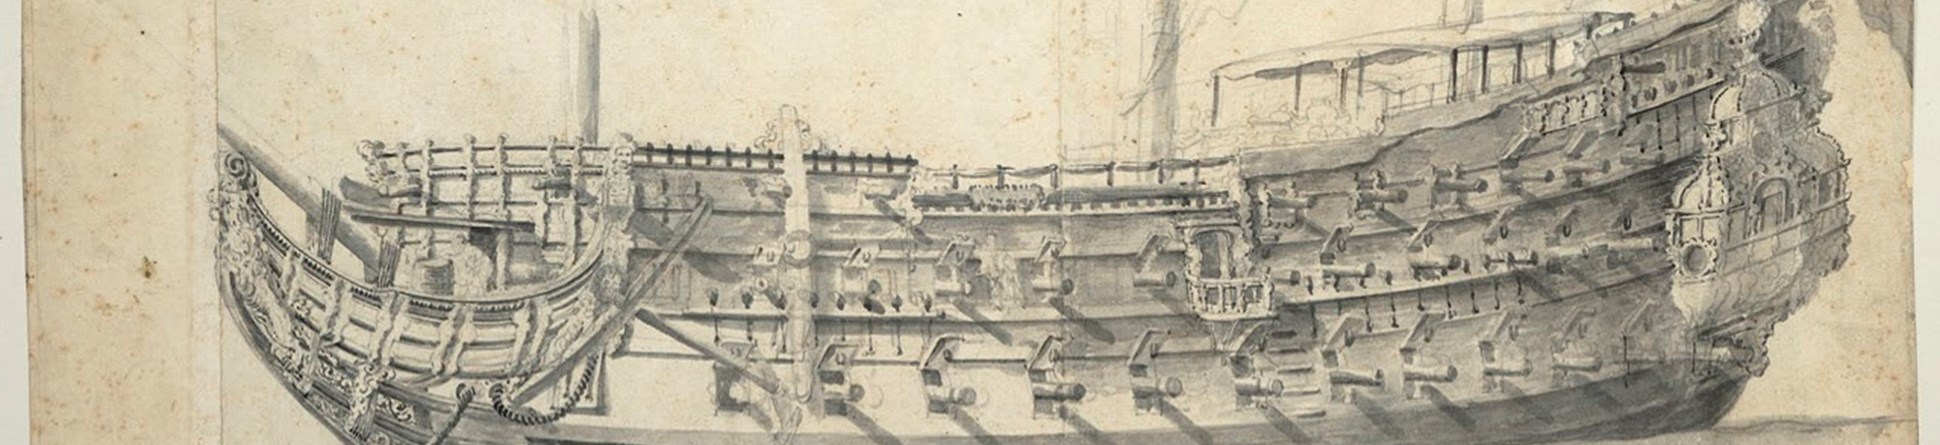 Pencil and wash illustration of a warship viewed from the side, with a flag flying from the stern at right. Only the lower portions of its masts are visible. At top left is a separate drawing of a Union Jack.